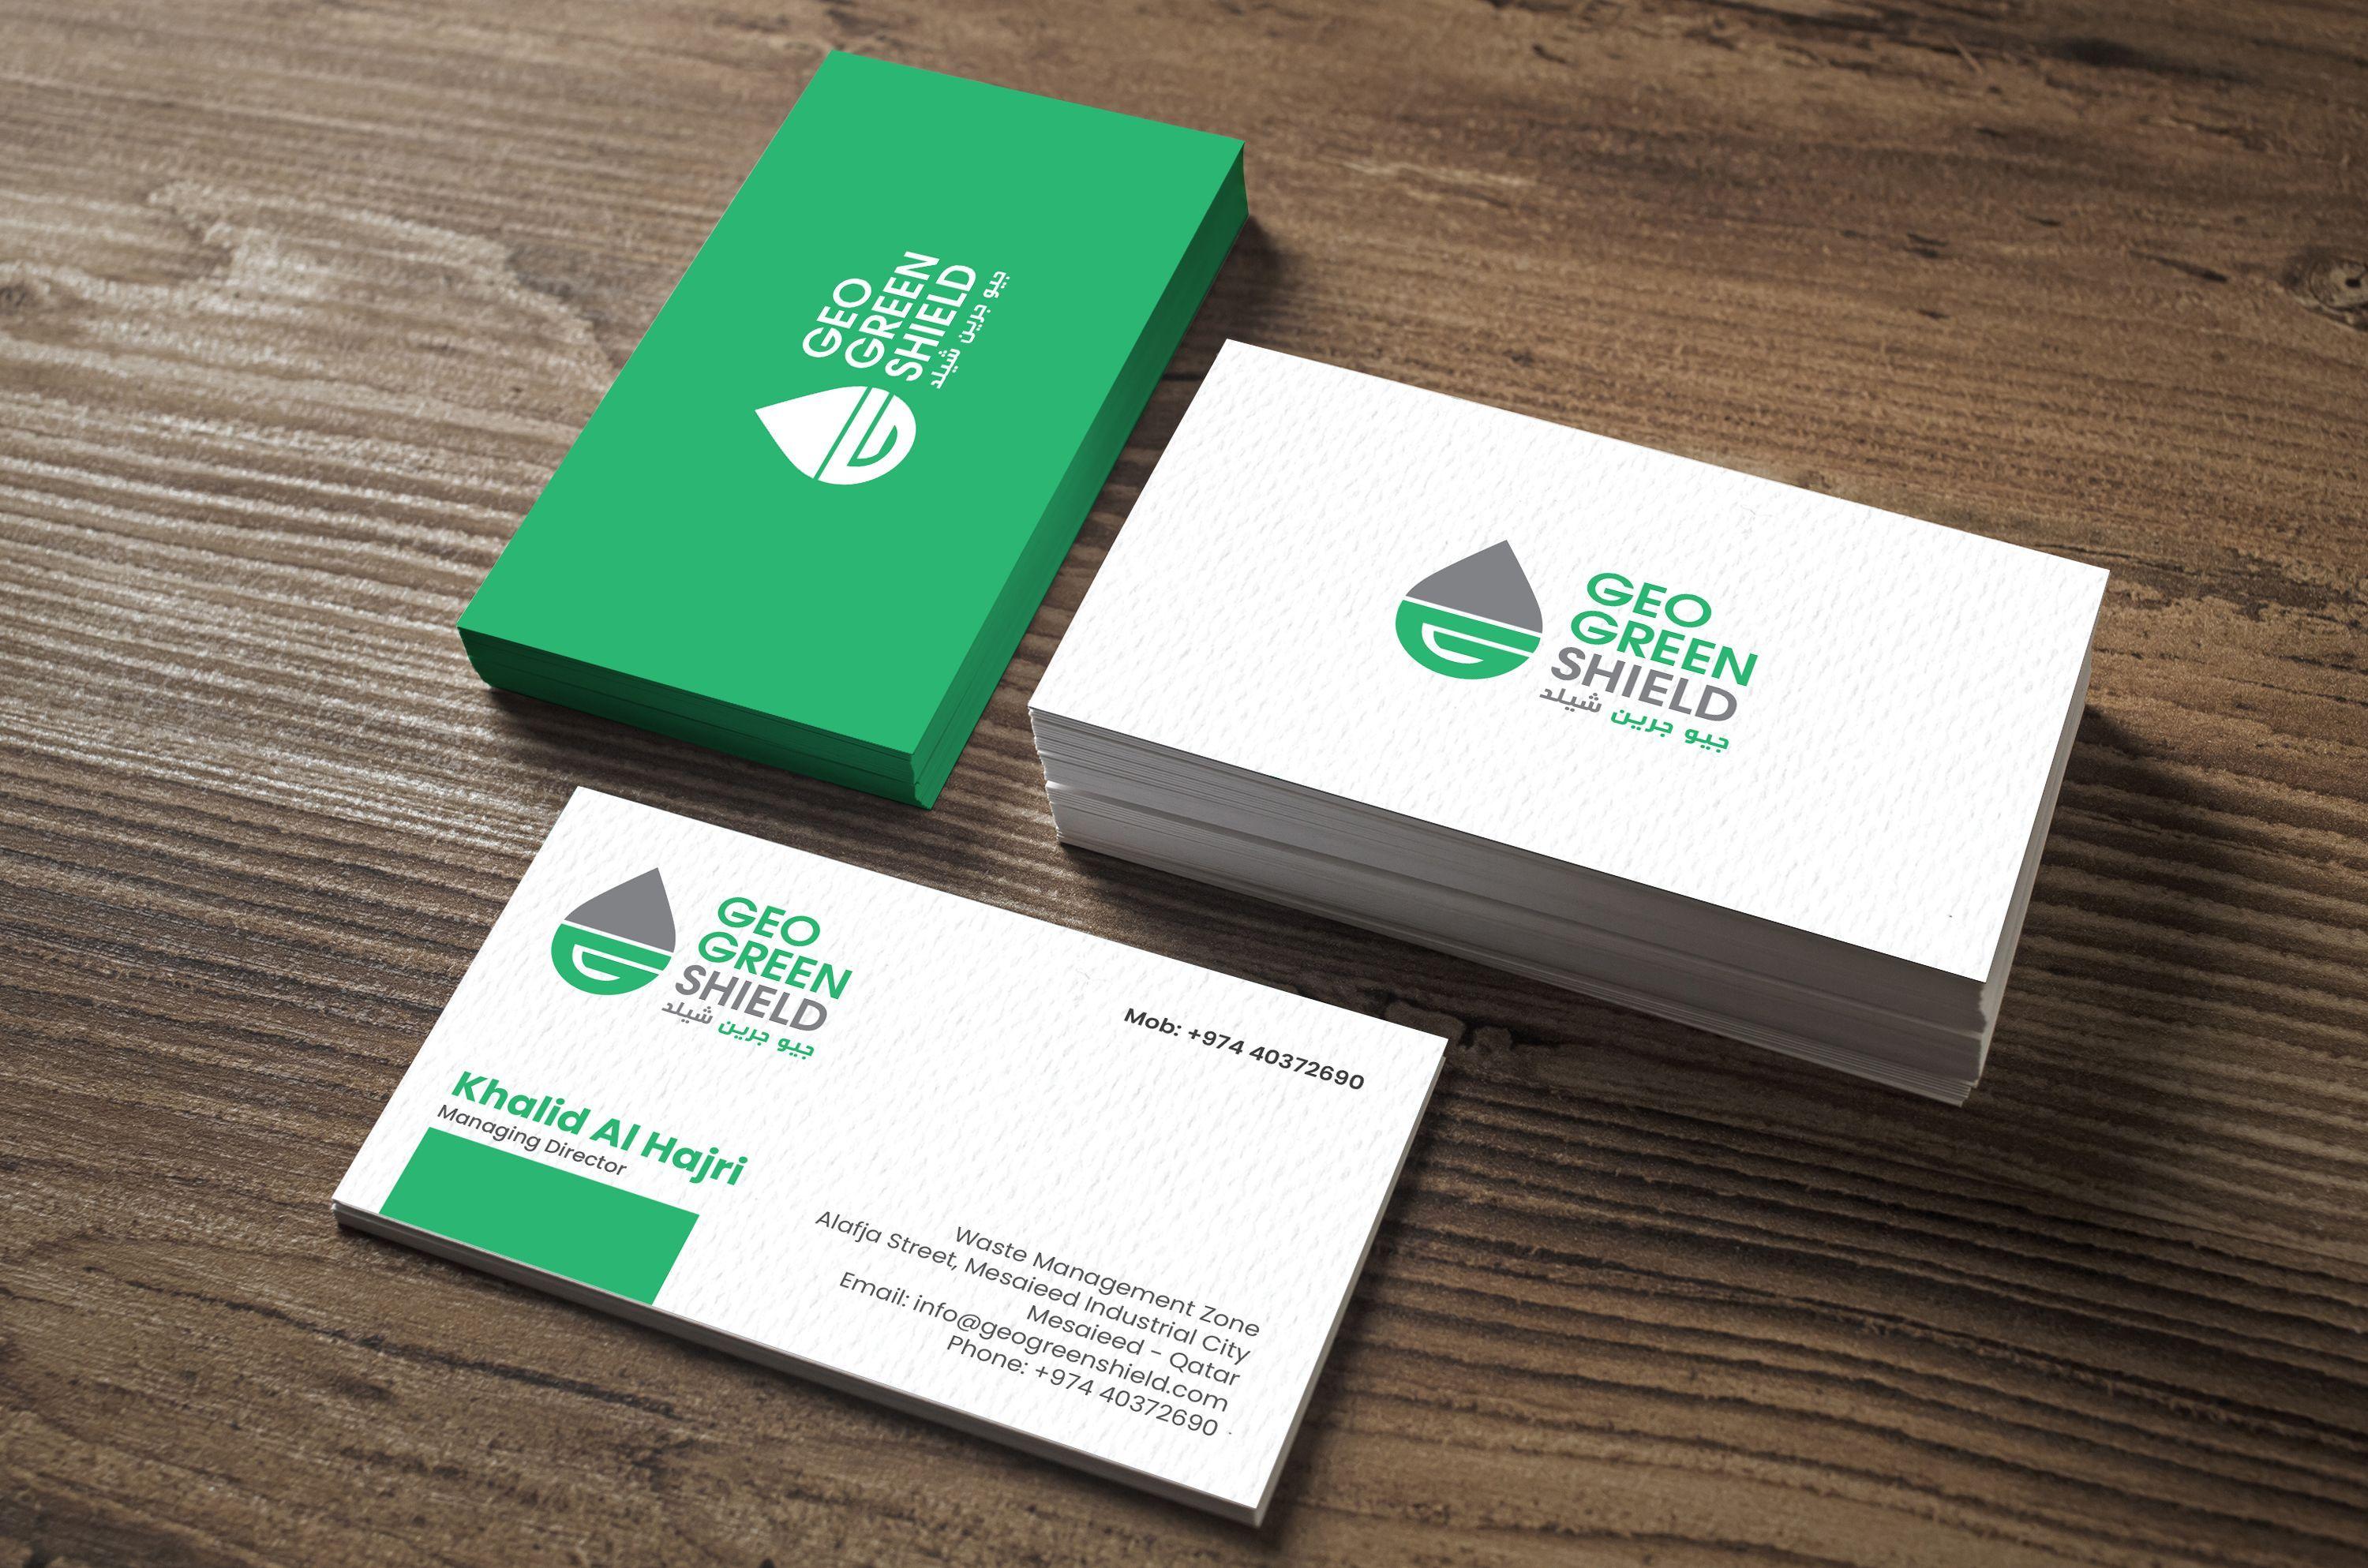 Green Shield with Company Logo - Our new work, Client: GEO GREEN SHIELD Company branding. Logo